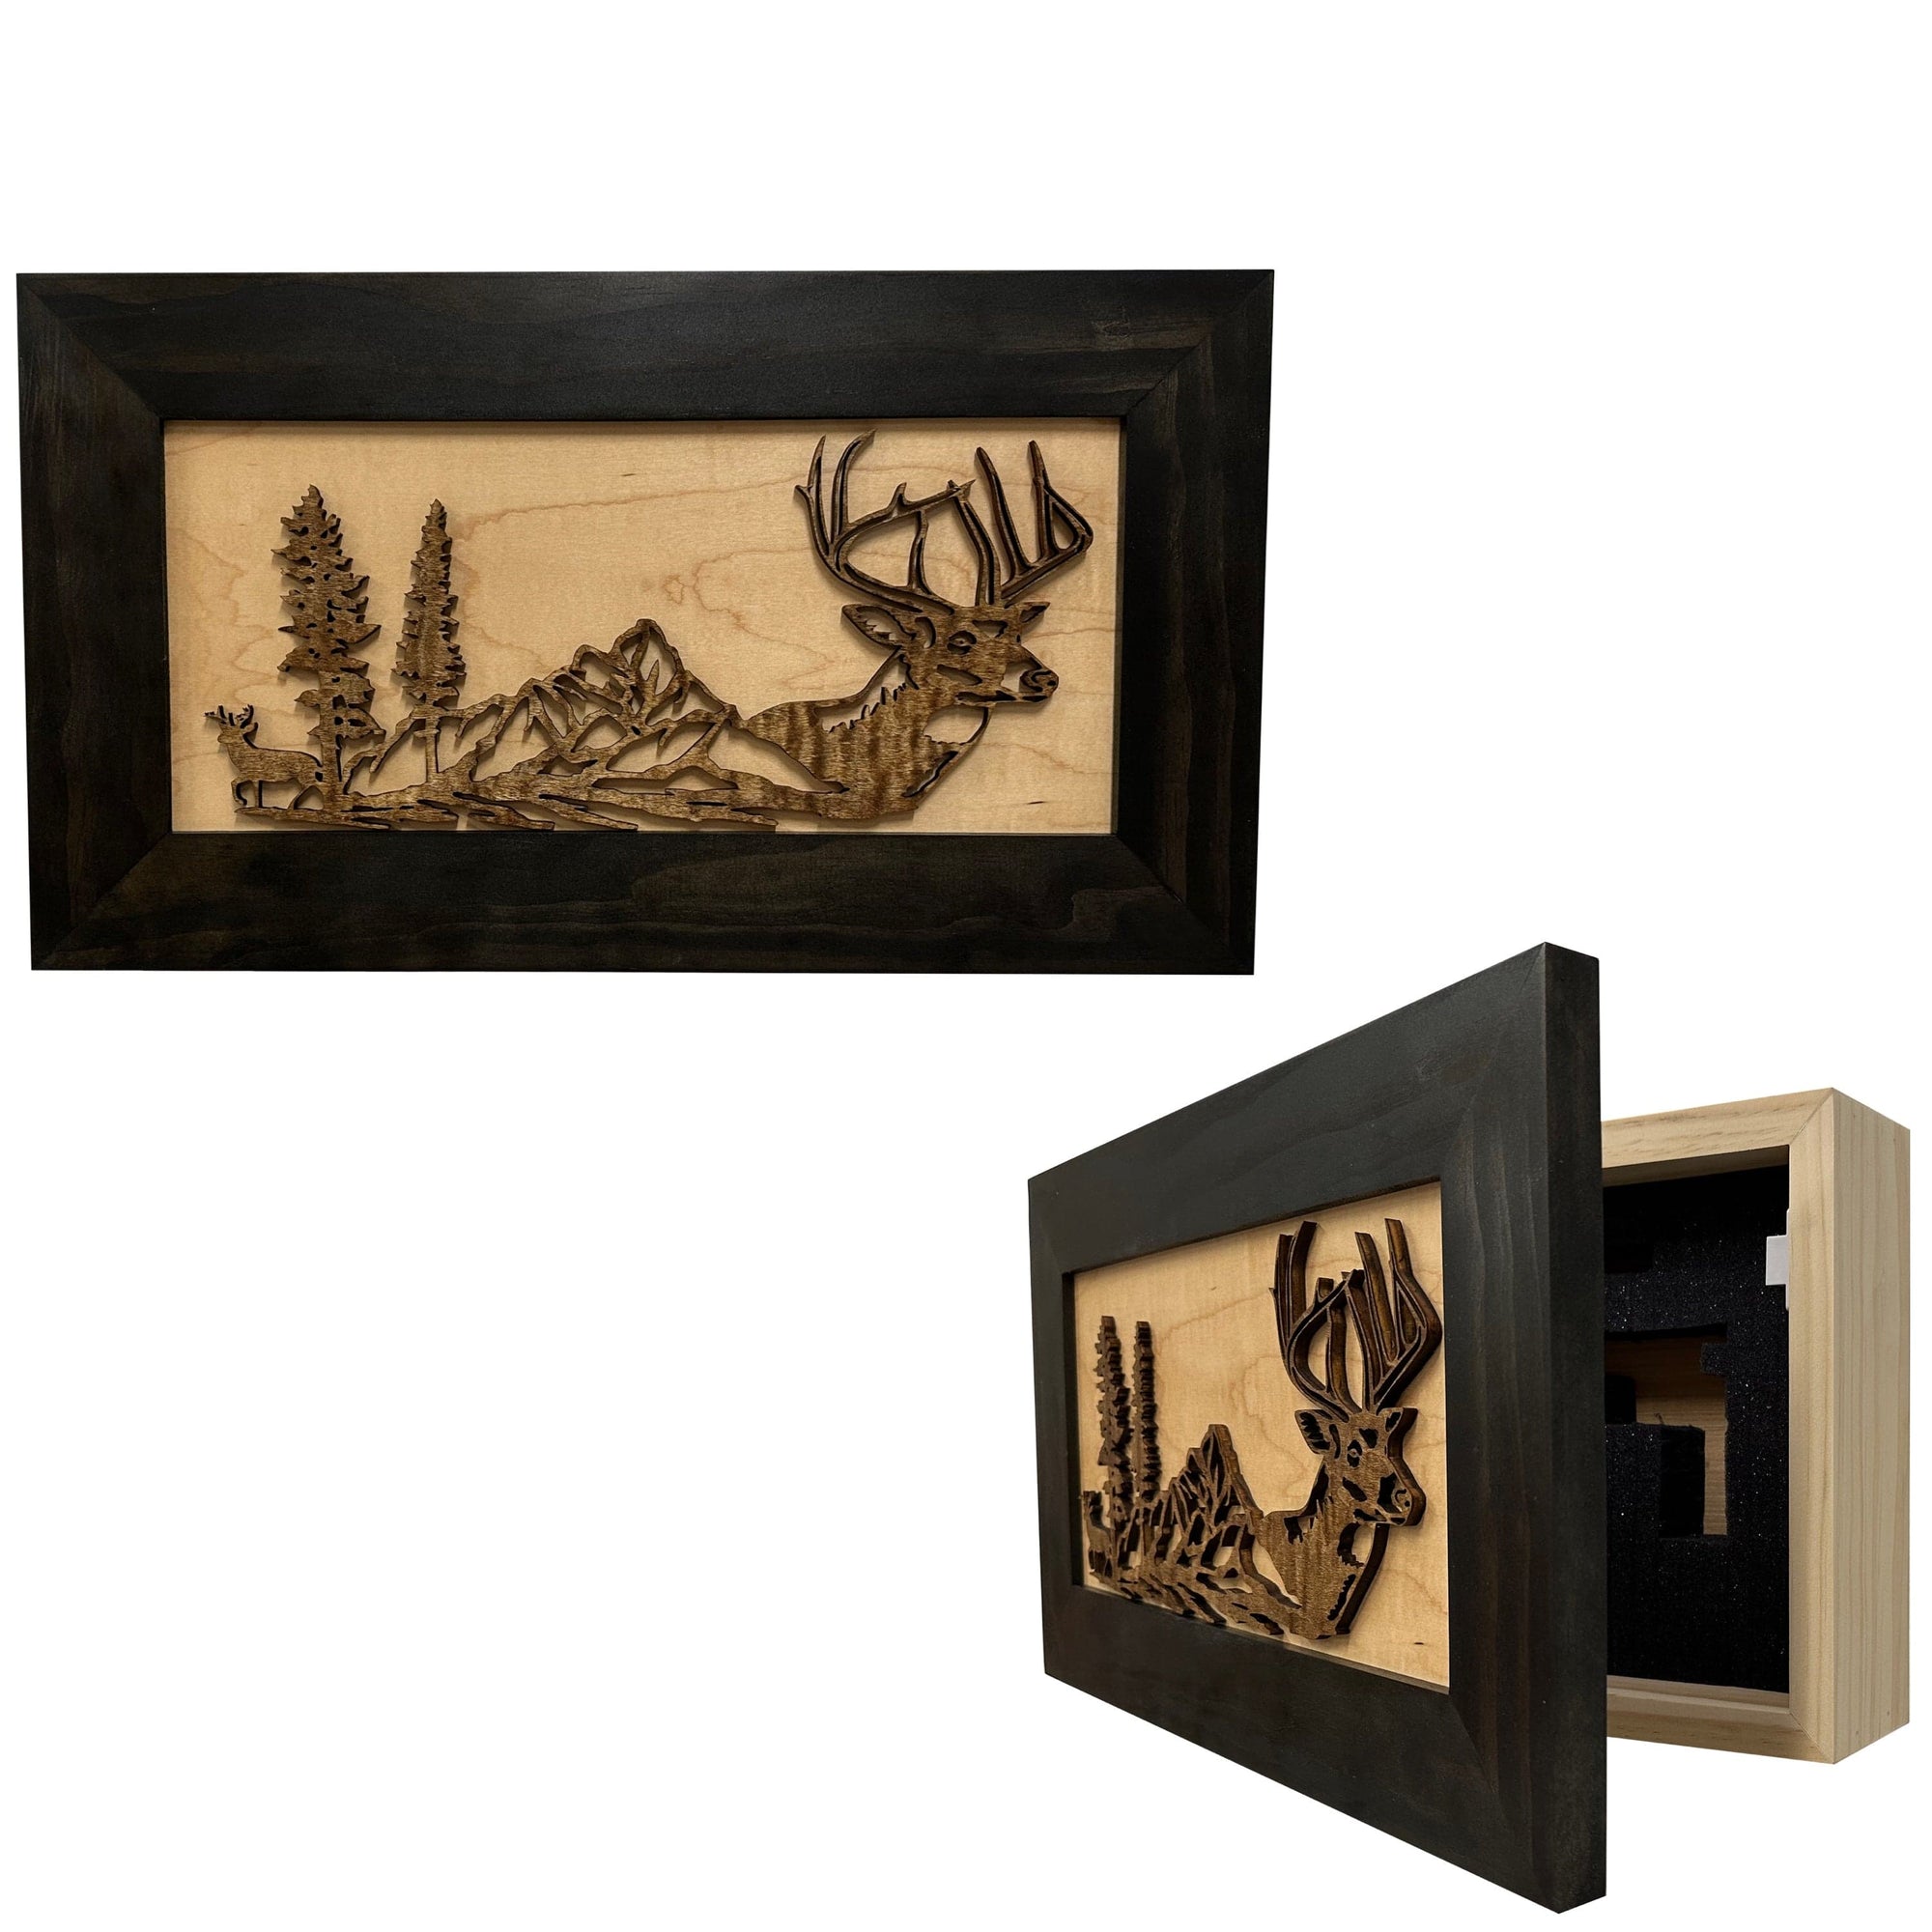 Decorative Secure Gun Cabinet with Deer Scene - Wall-Mounted Gun Safe To Securely Store Your Personal Protection Armadillo Safe and Vault